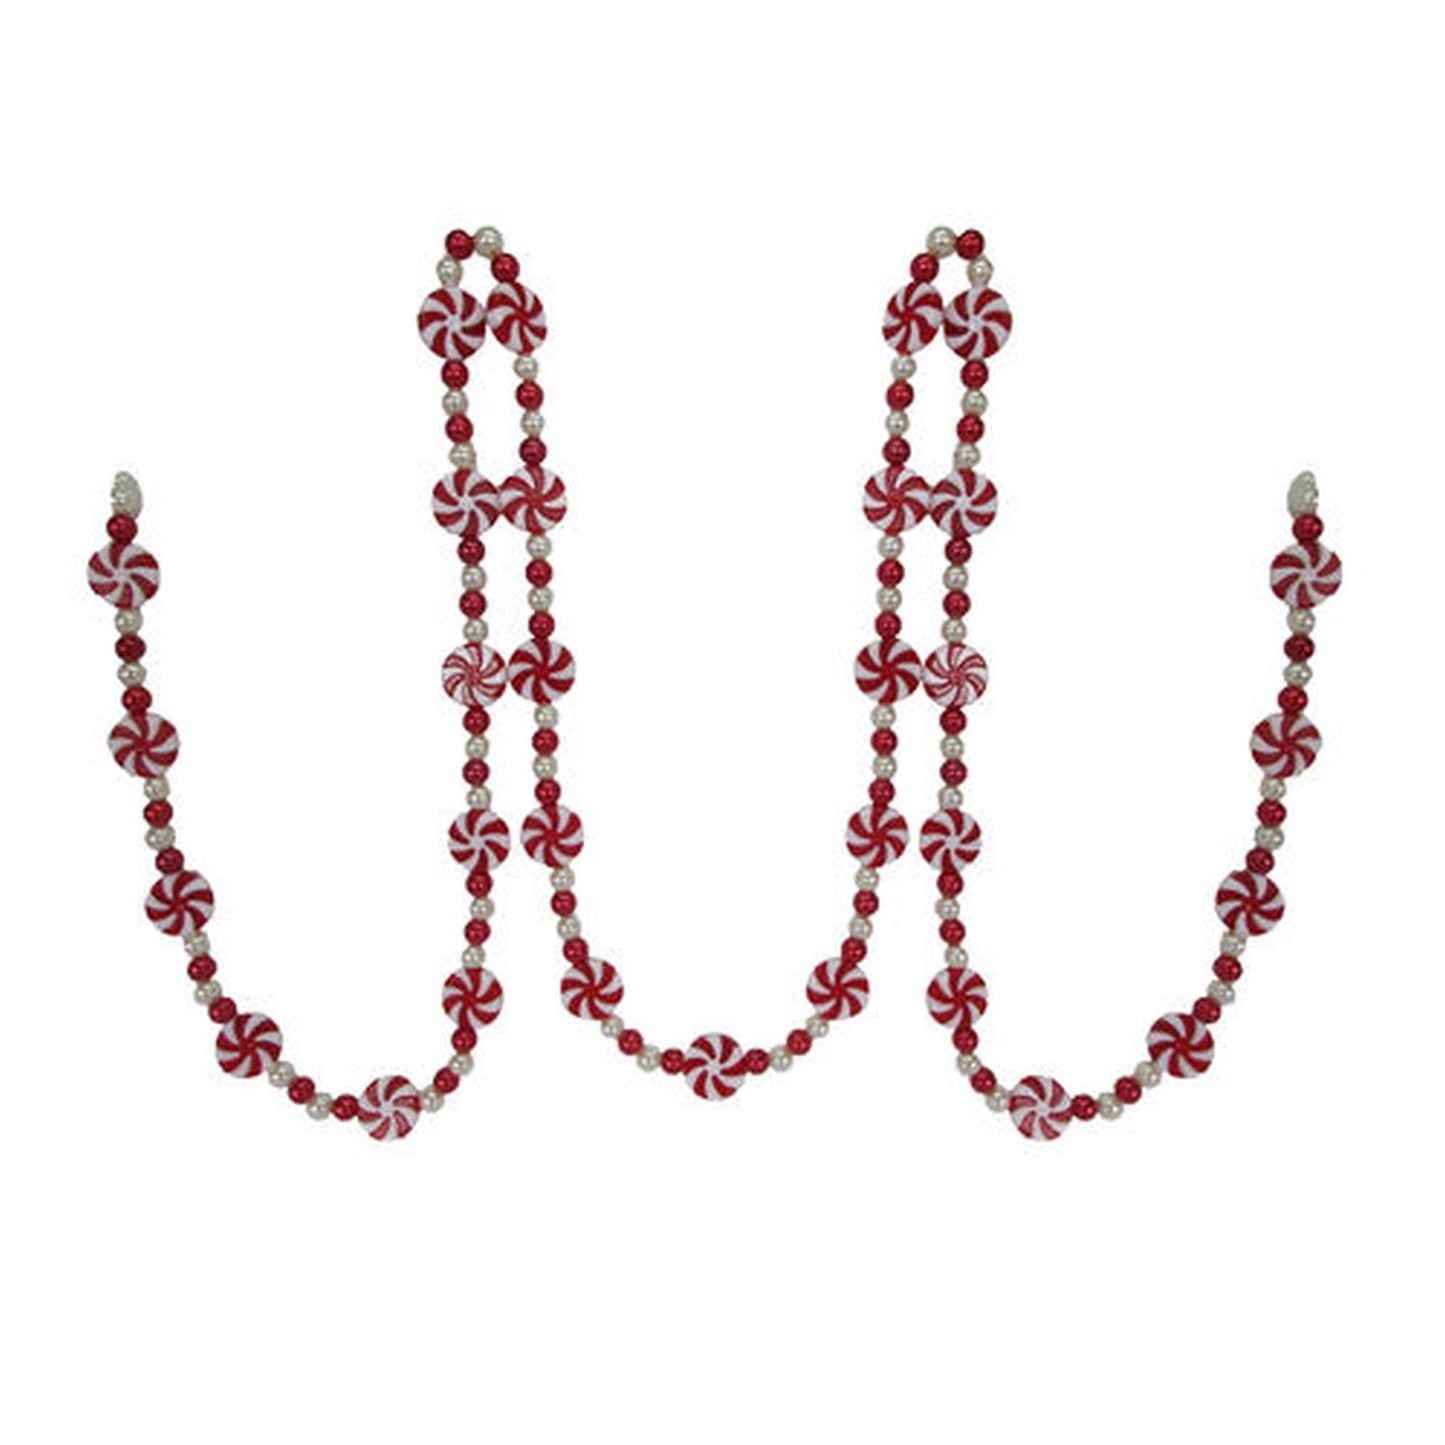 December Diamonds Candy Cane Lace Peppermint Garland